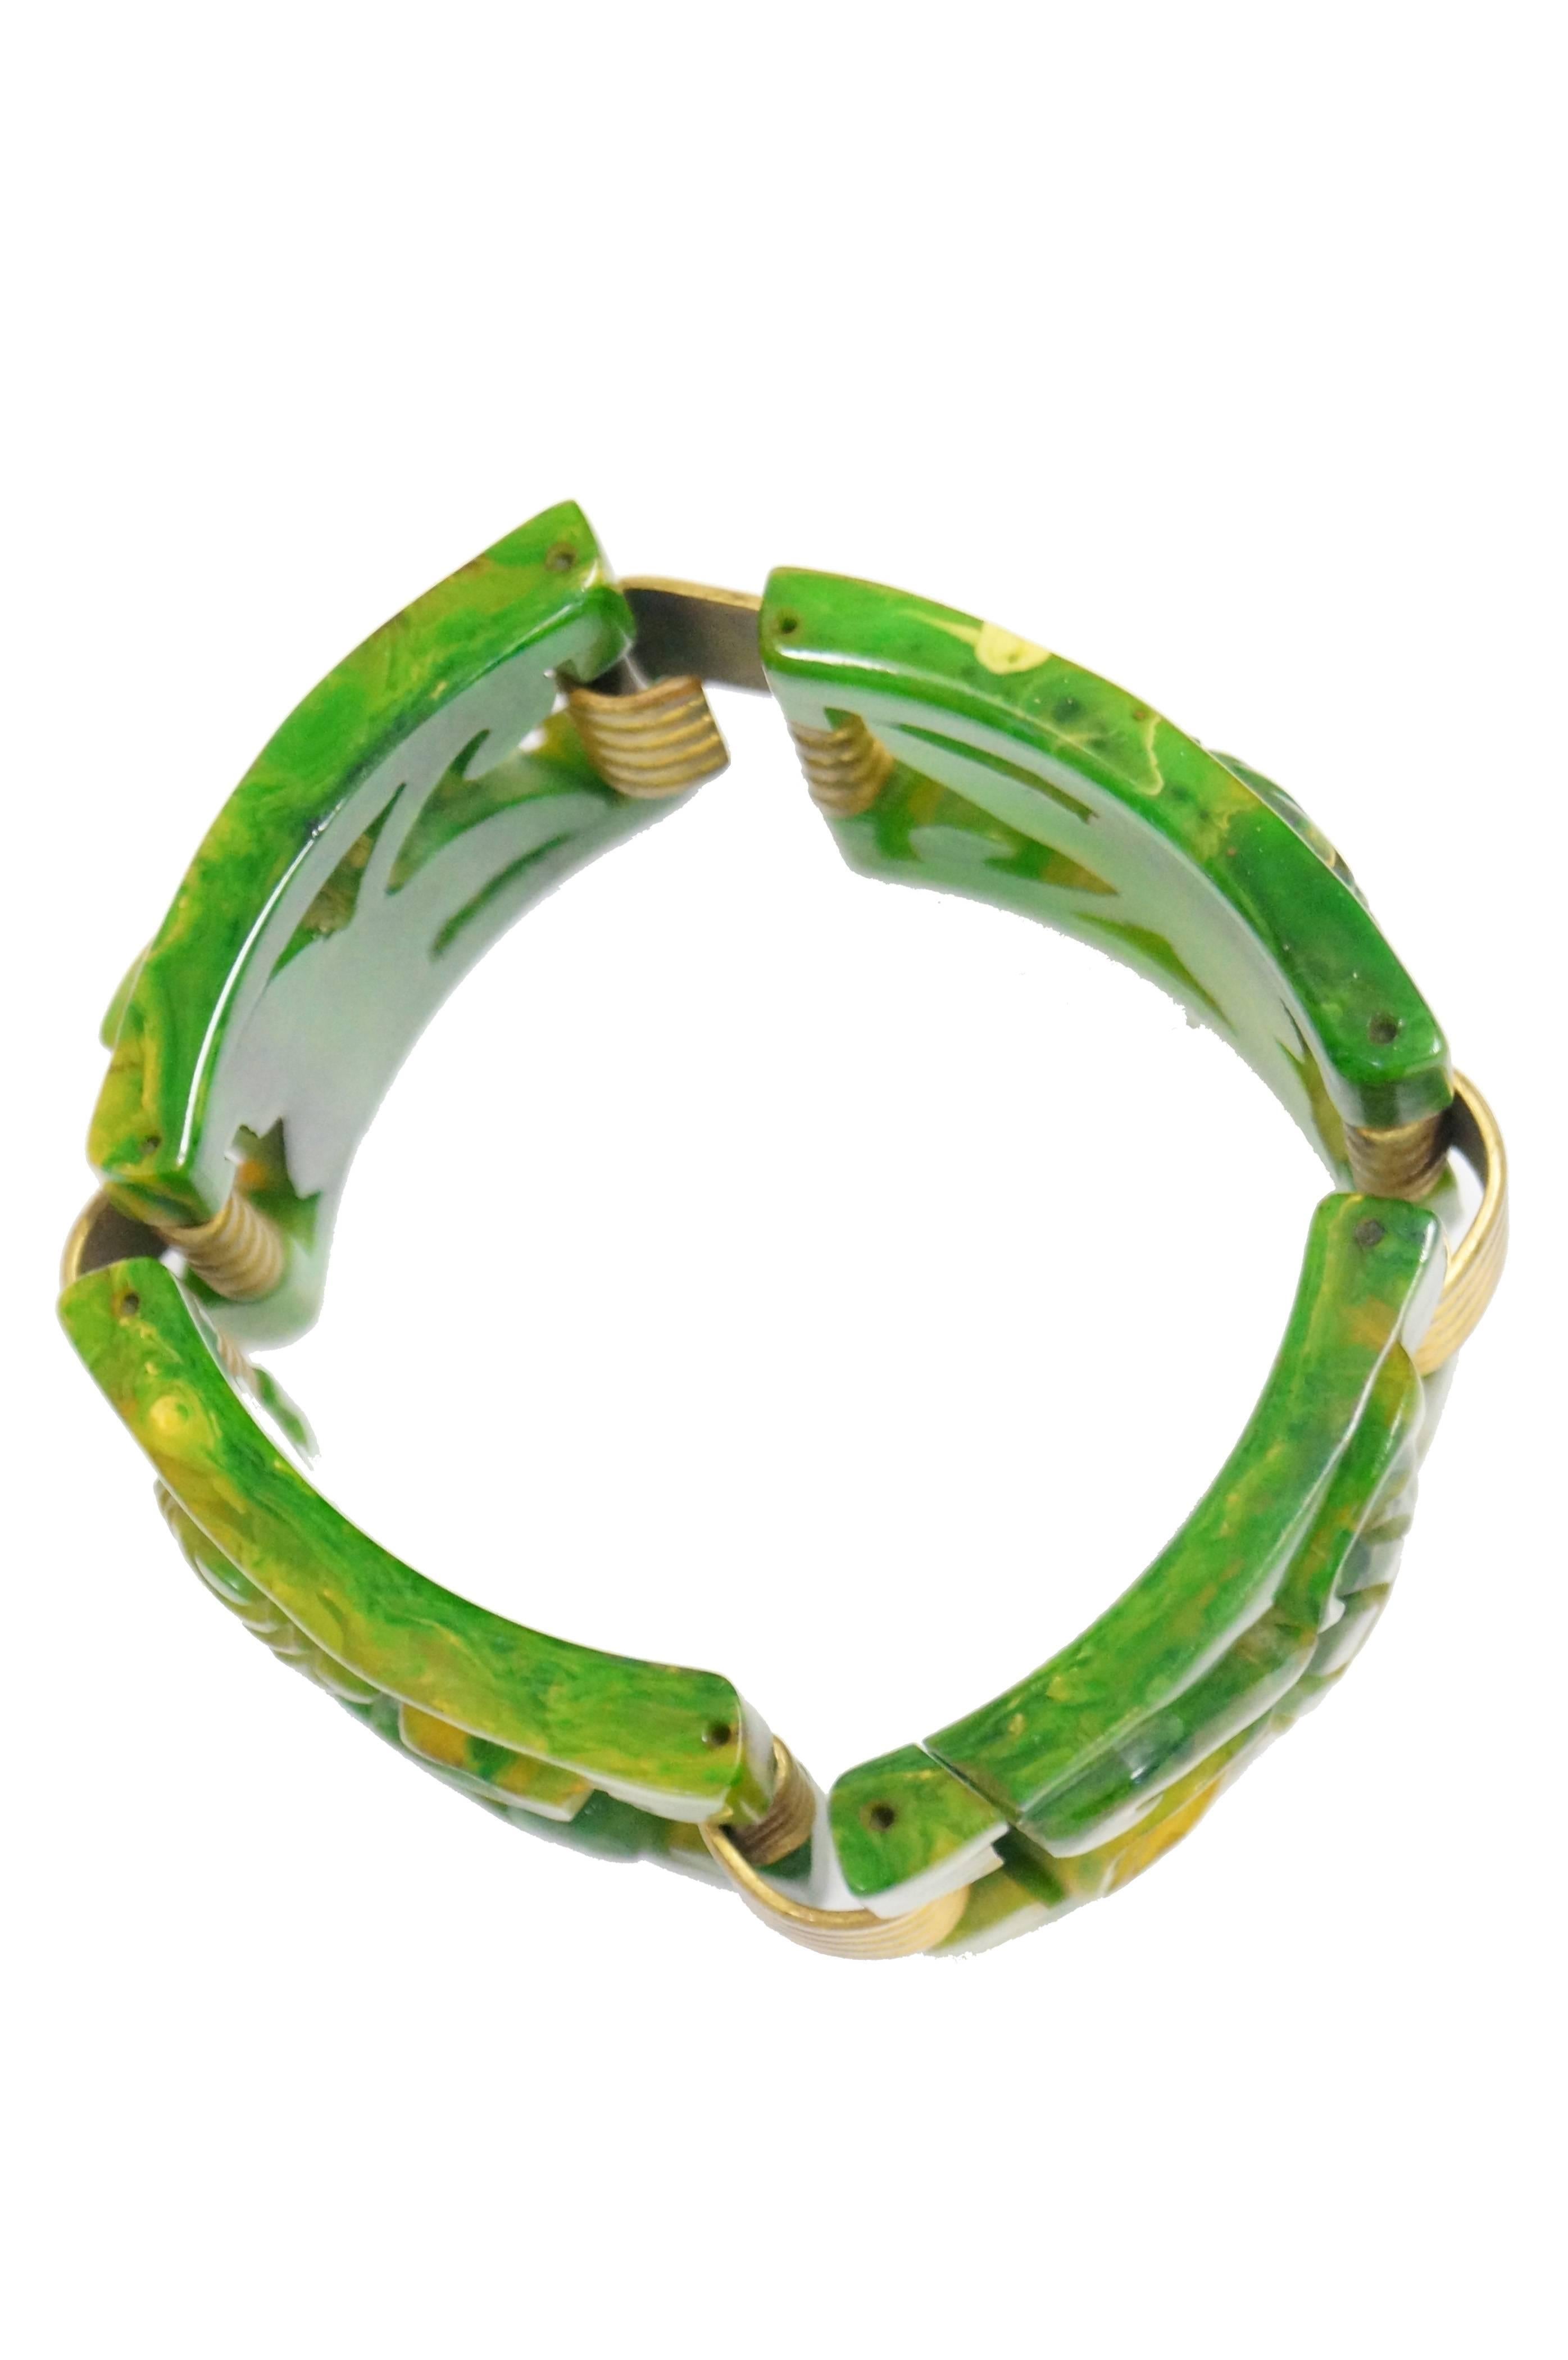 Fabulous heavy marbled green, gold, and clear book chain link bracelet. The bracelet is composed of four separate floral molded bakelite book-chain-like links held together by gold tone ridged hook links. The piece is almost 100 years old, and has